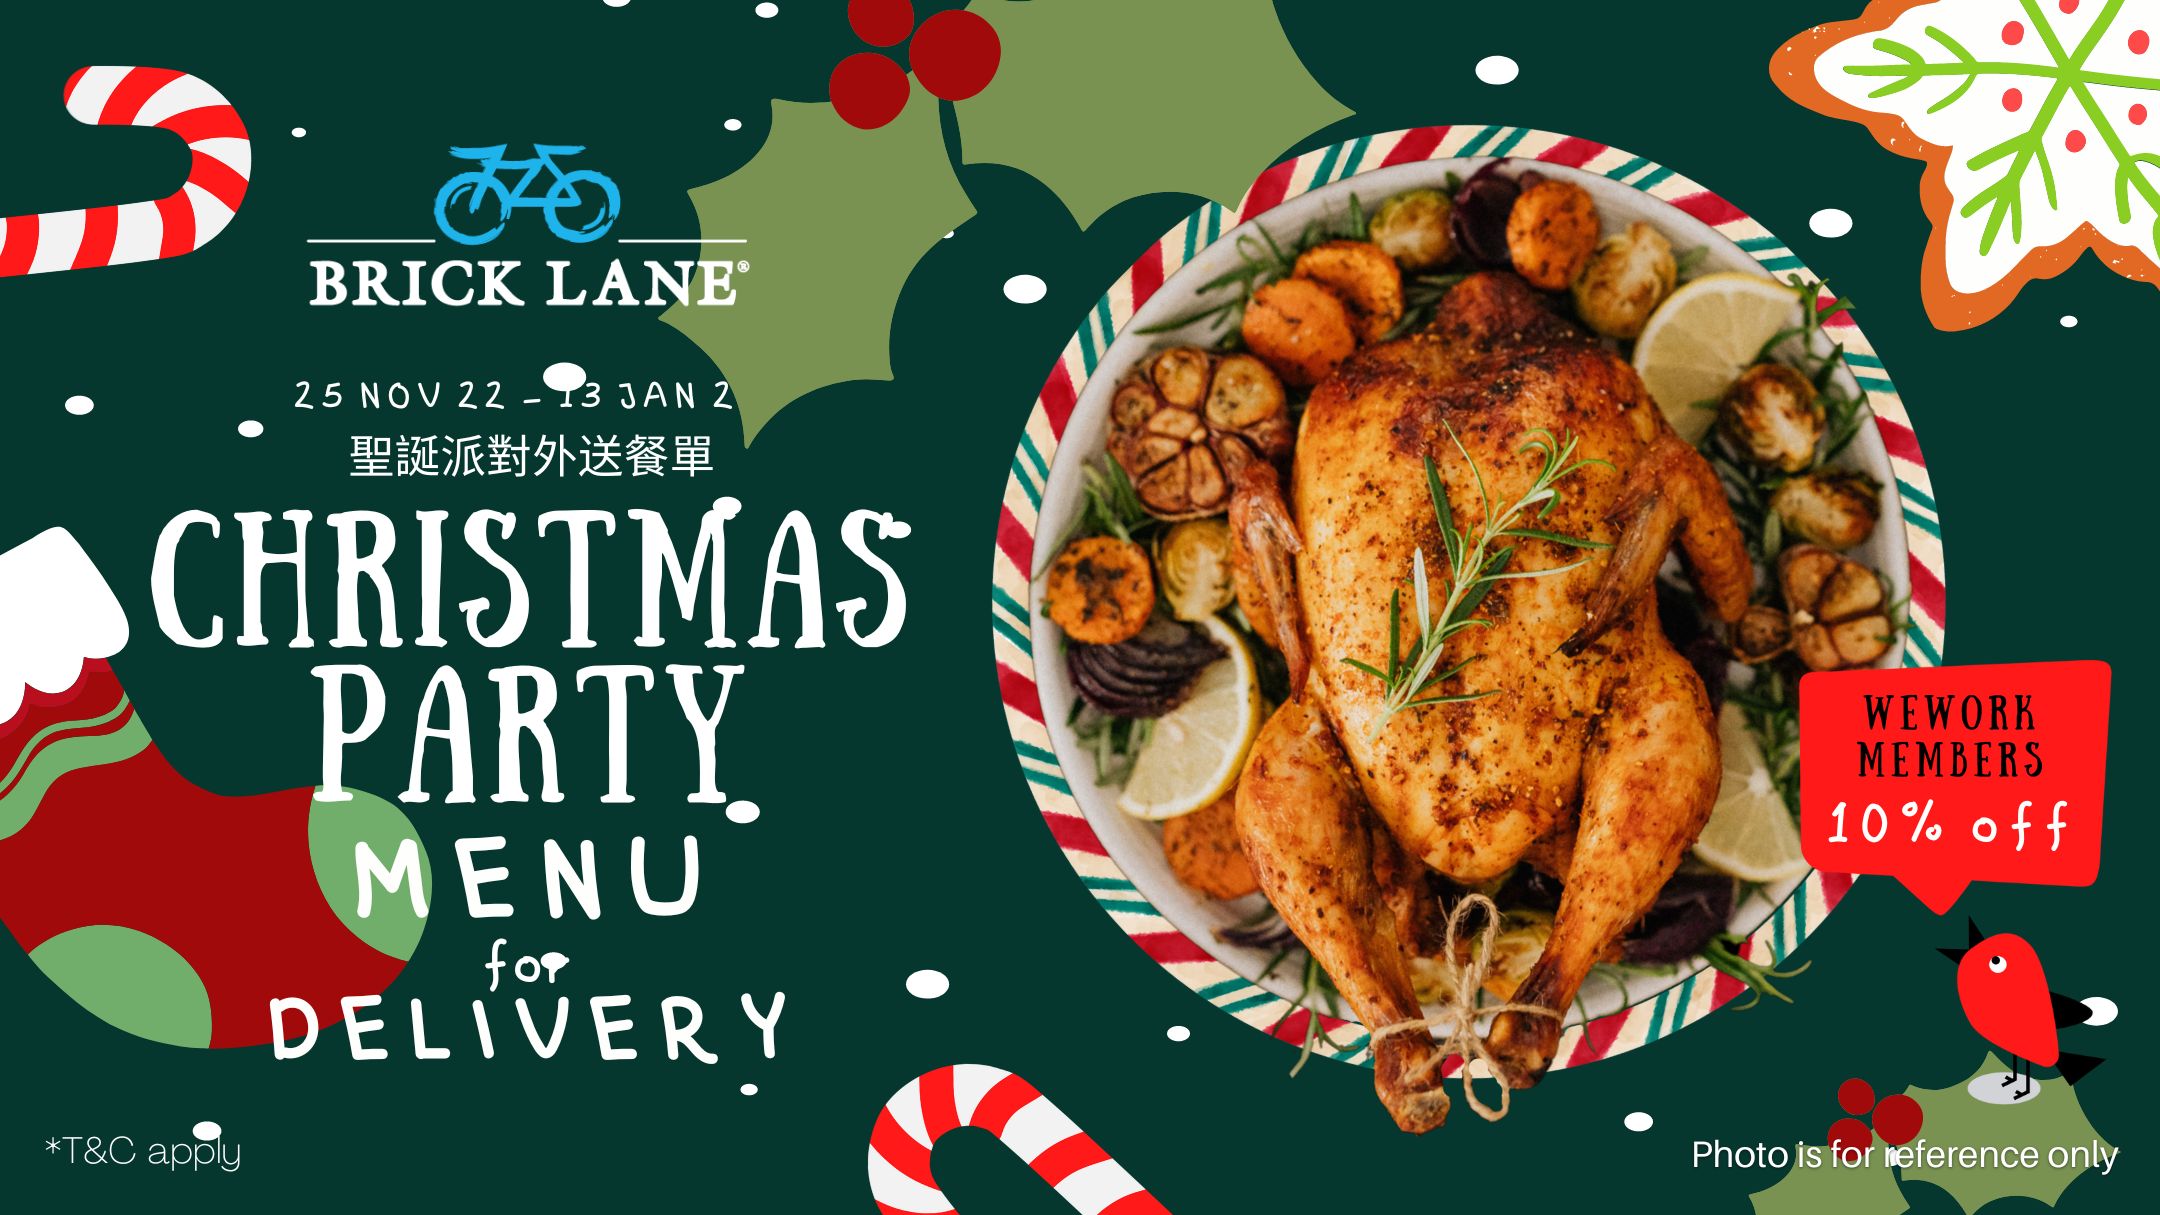 BRICK LANE Christmas Party Delivery Offer